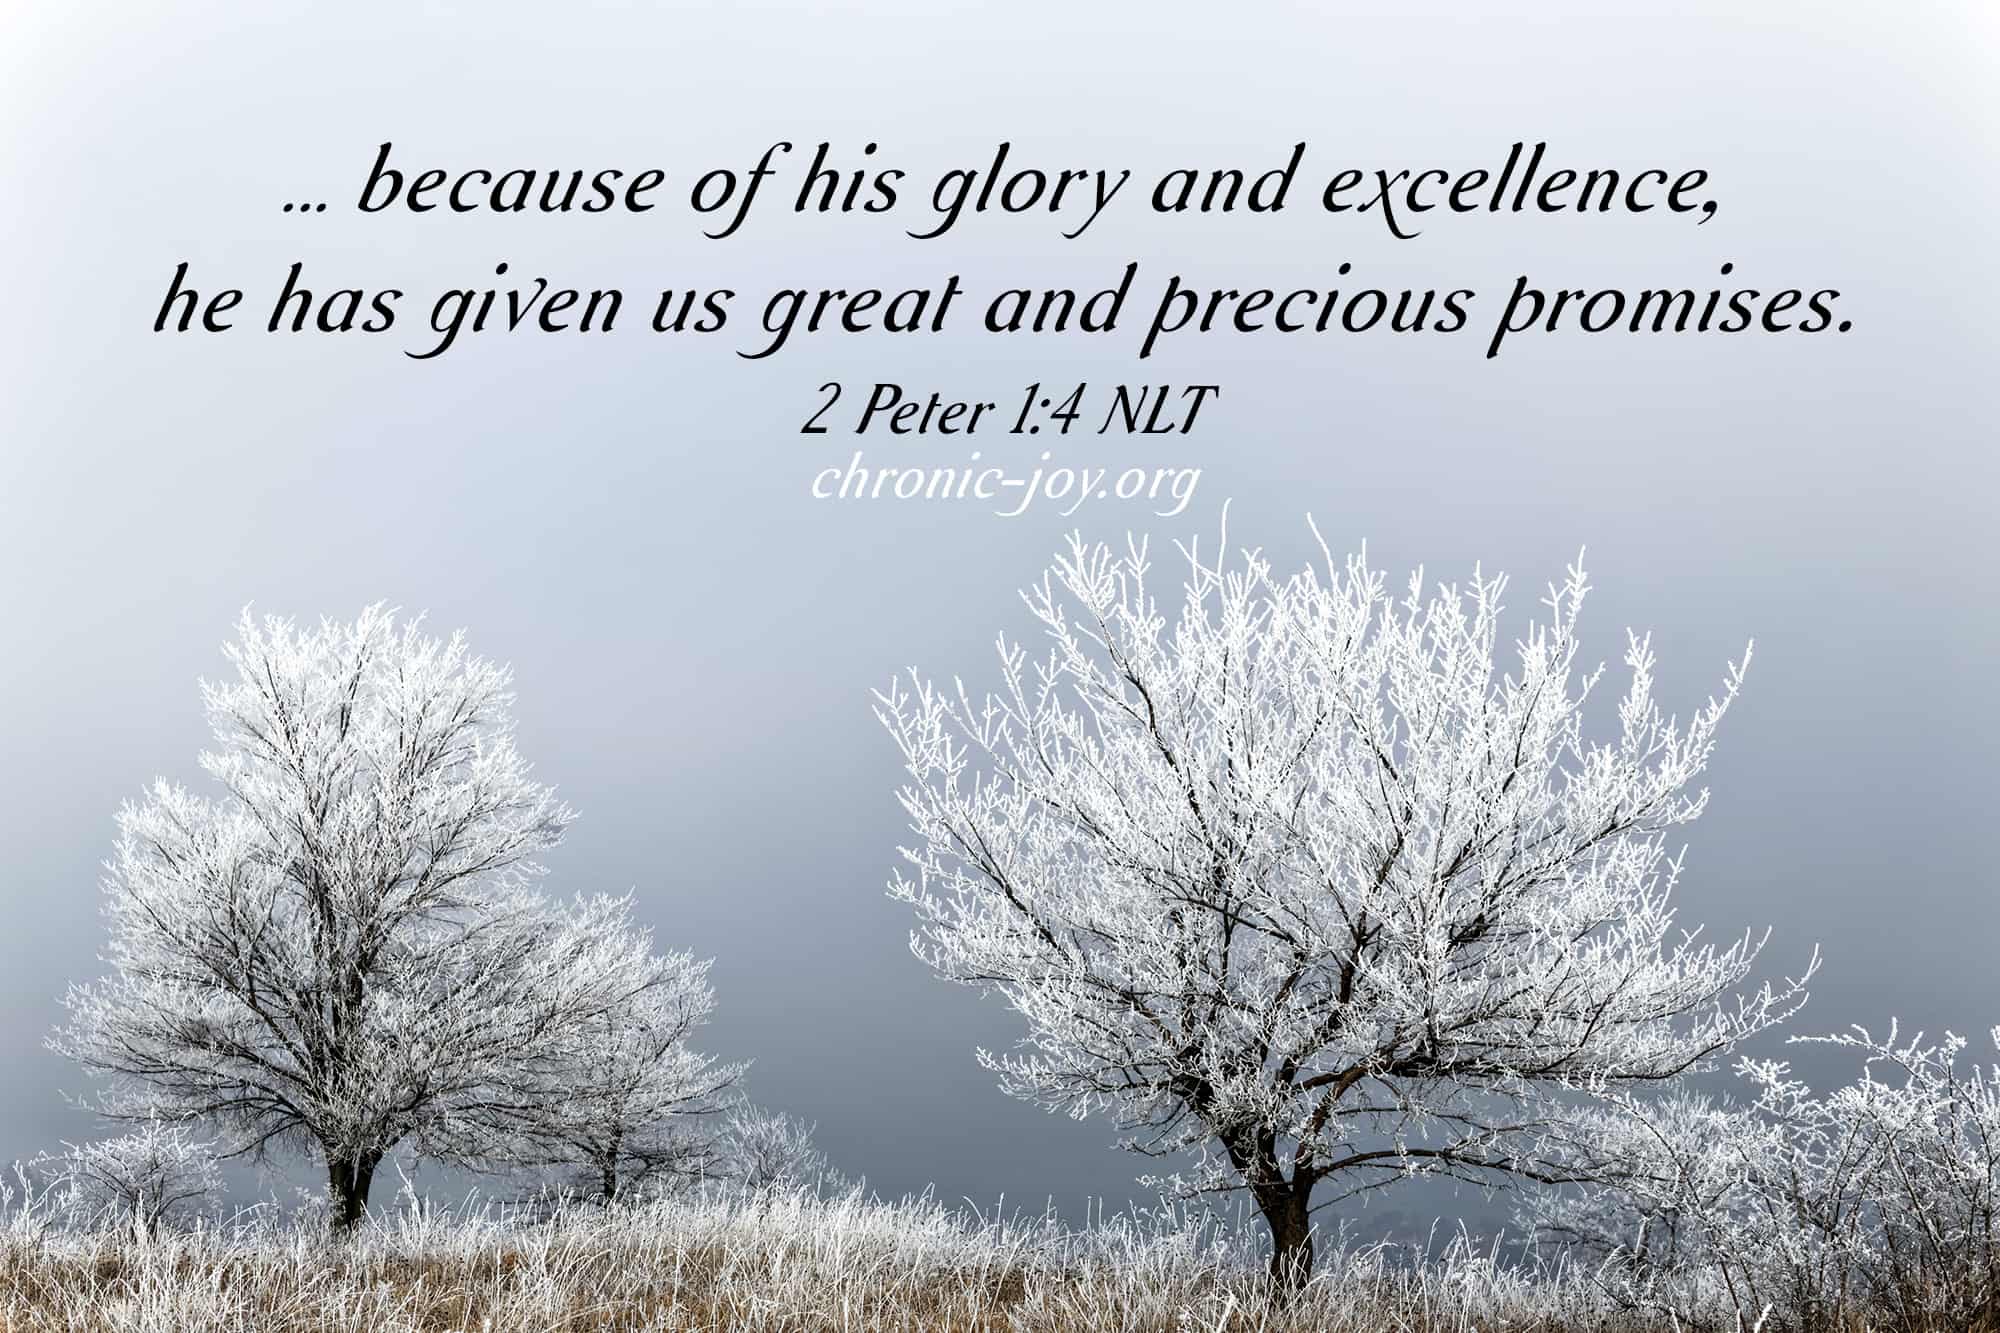 "... because of his glory and excellence, he has given us great and precious promises." 2 Peter 1:4 NLT